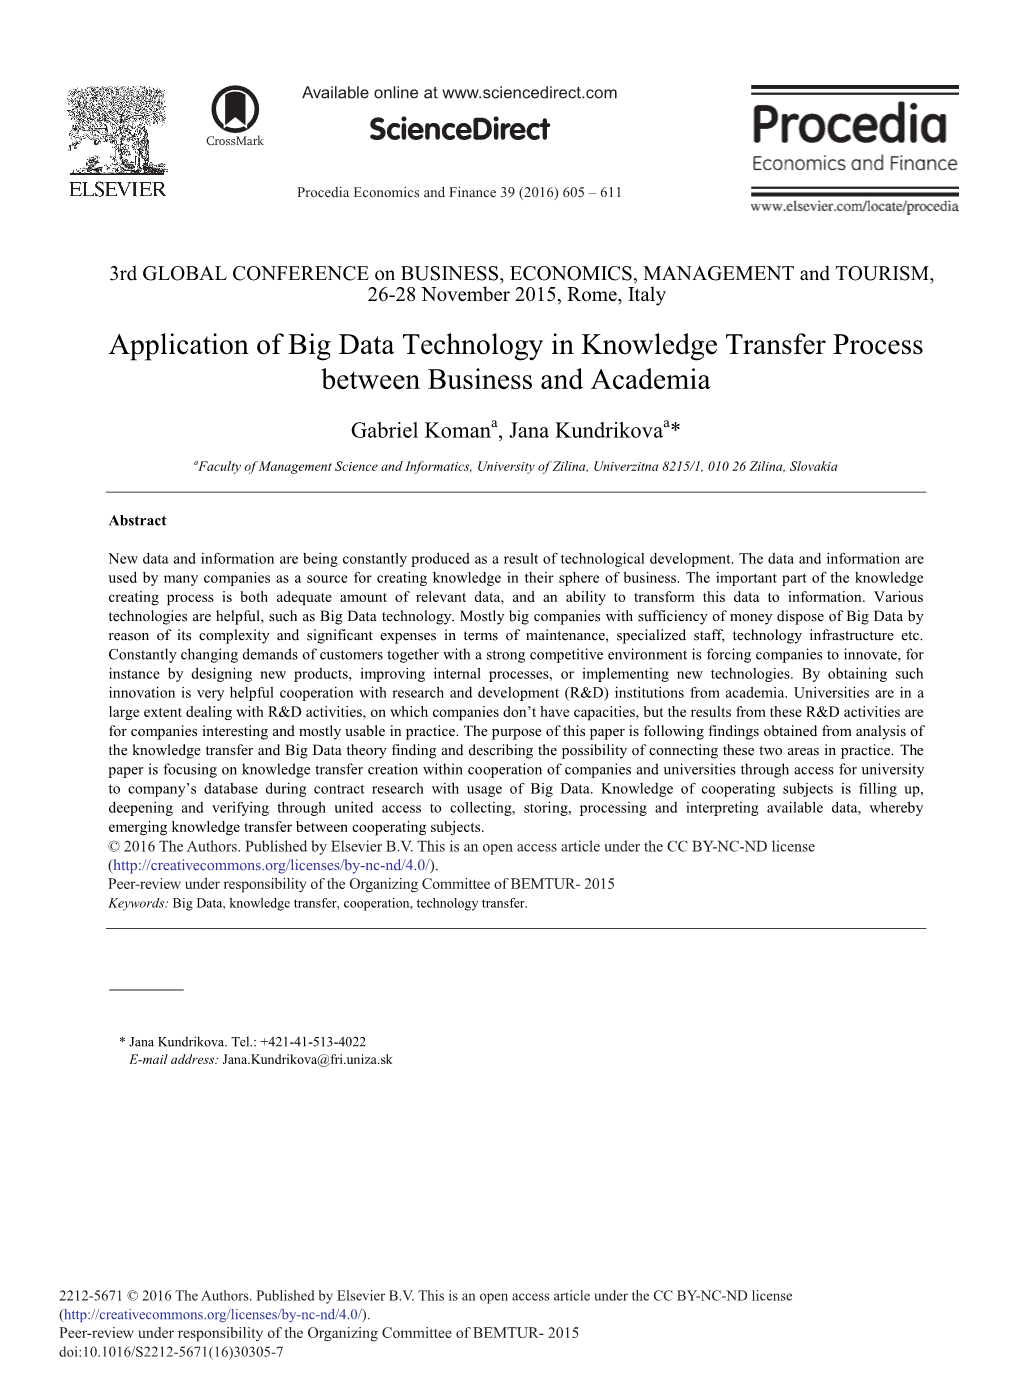 Application of Big Data Technology in Knowledge Transfer Process Between Business and Academia